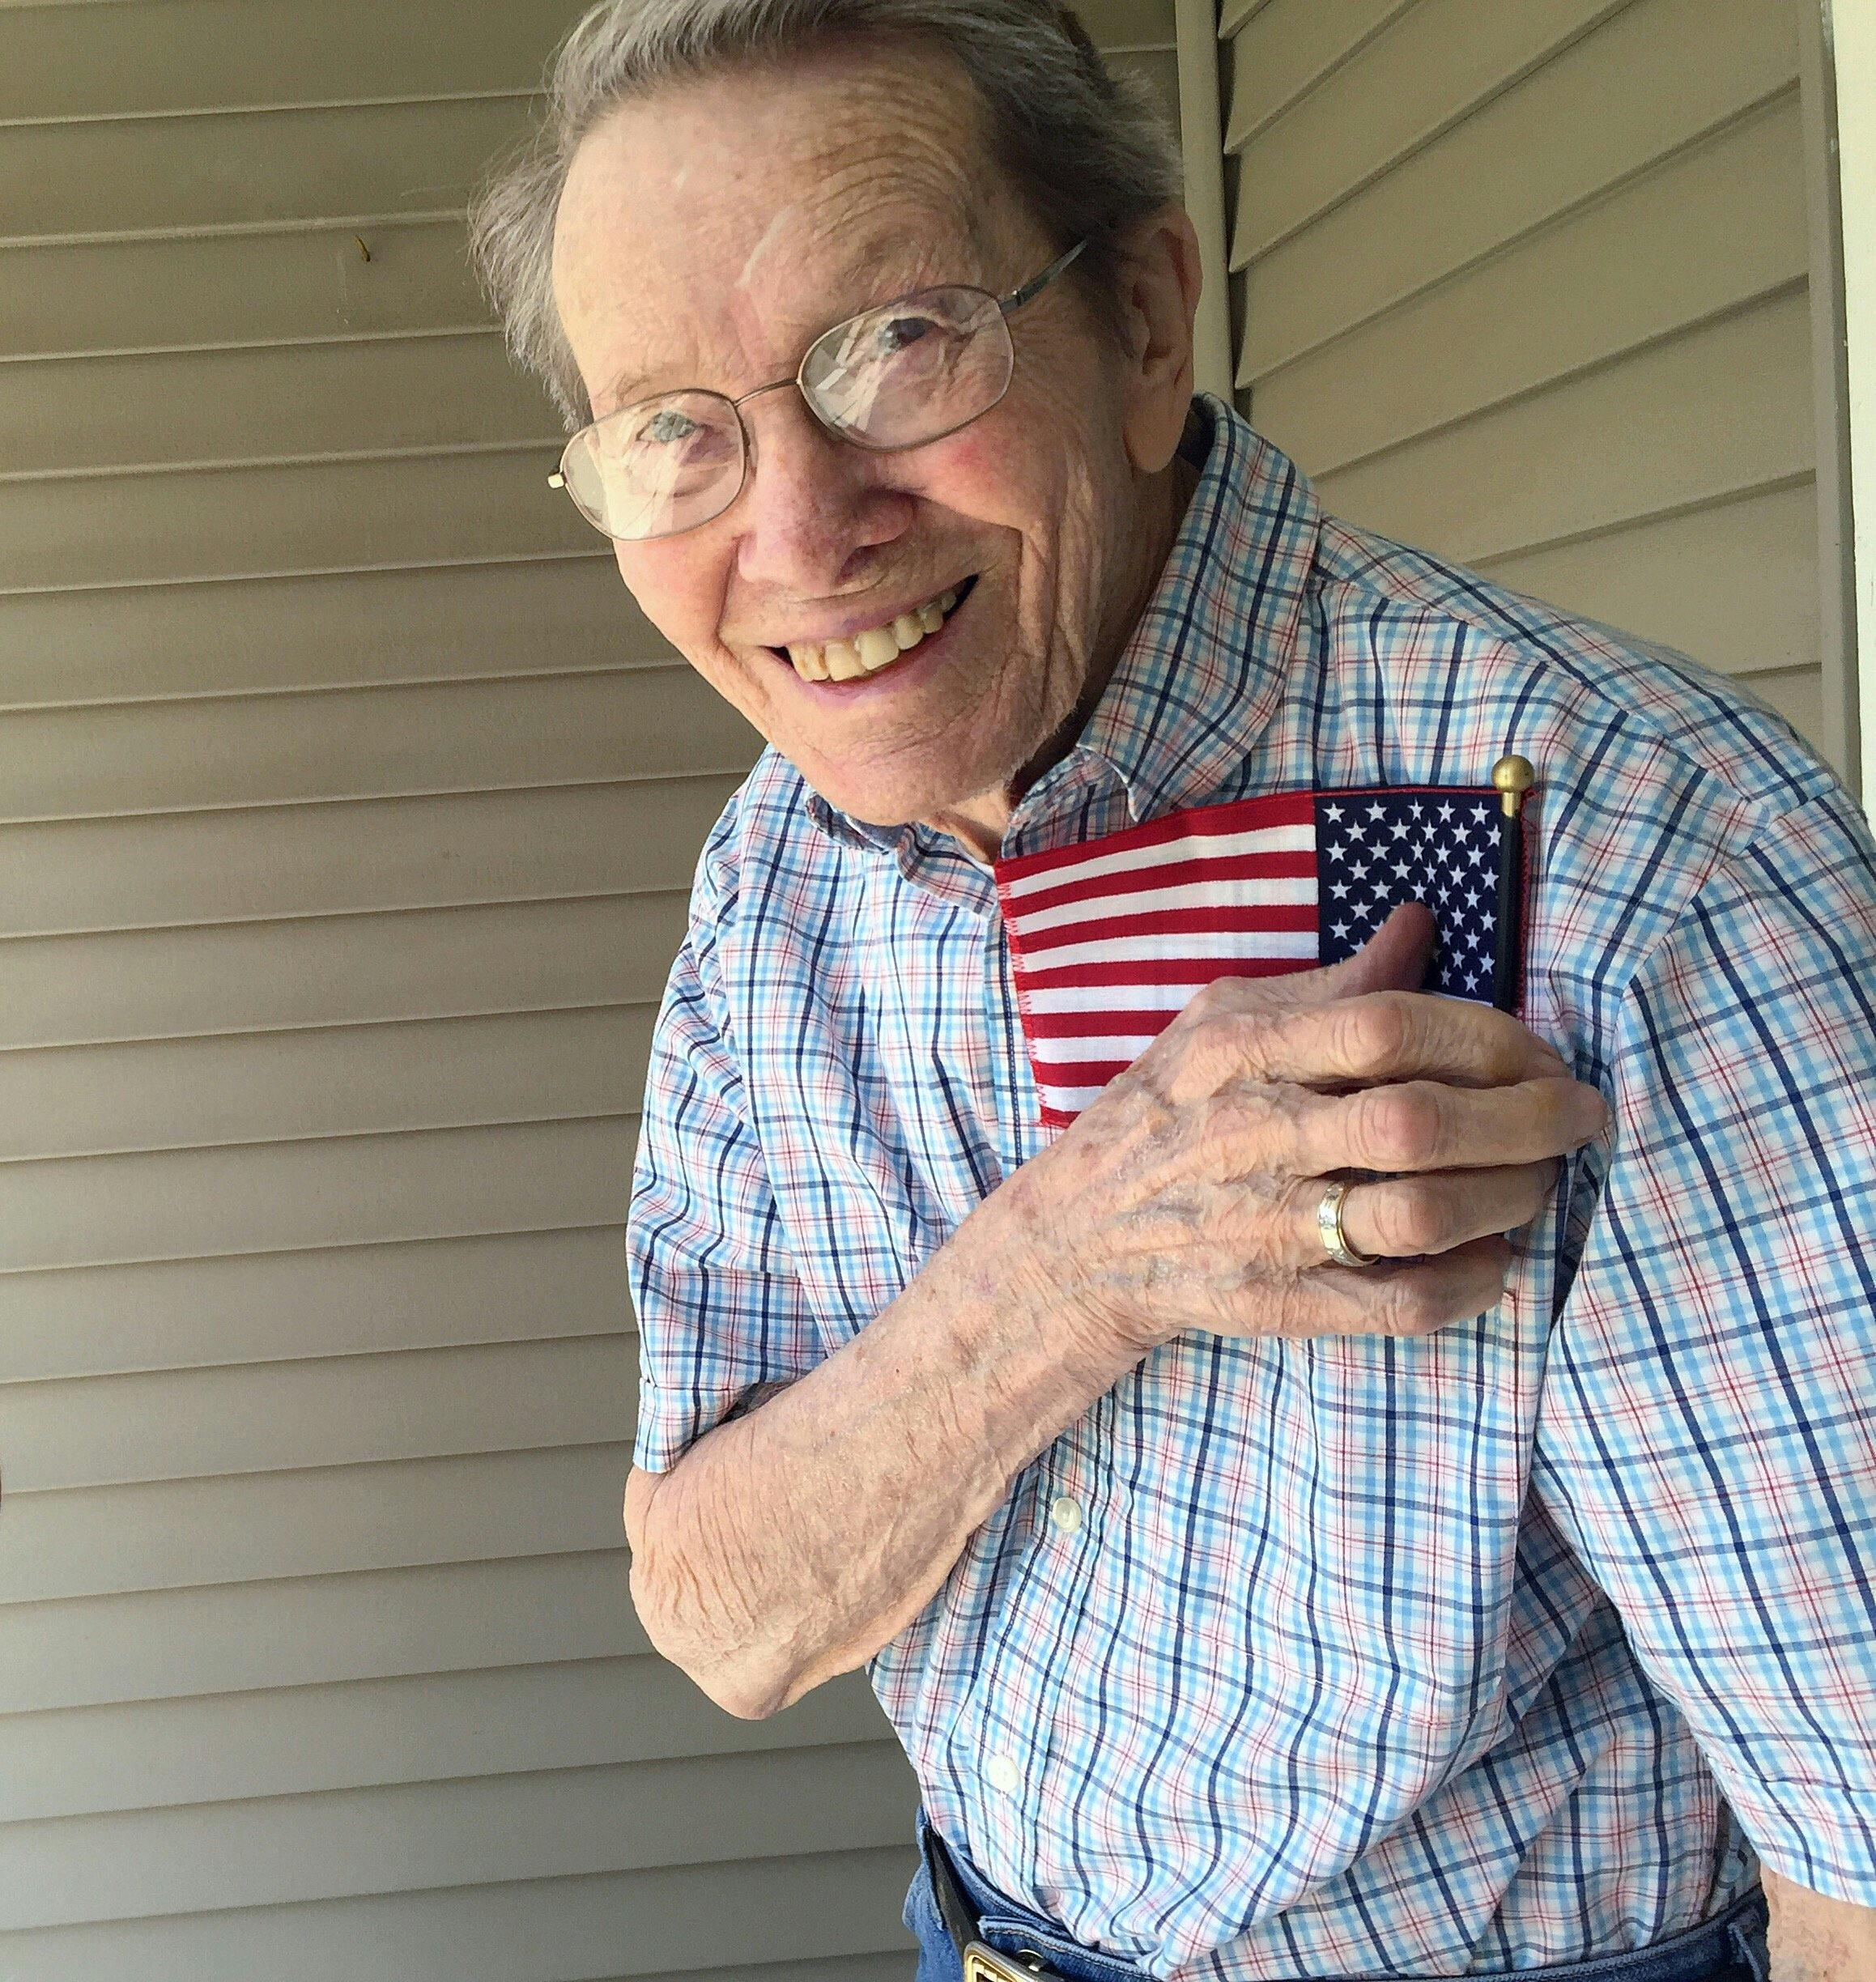 blessed-to-have-my-91-year-old-grandfather-still-with-me-today-proudly-served-in-the-navy-during_t20_pYJKb8